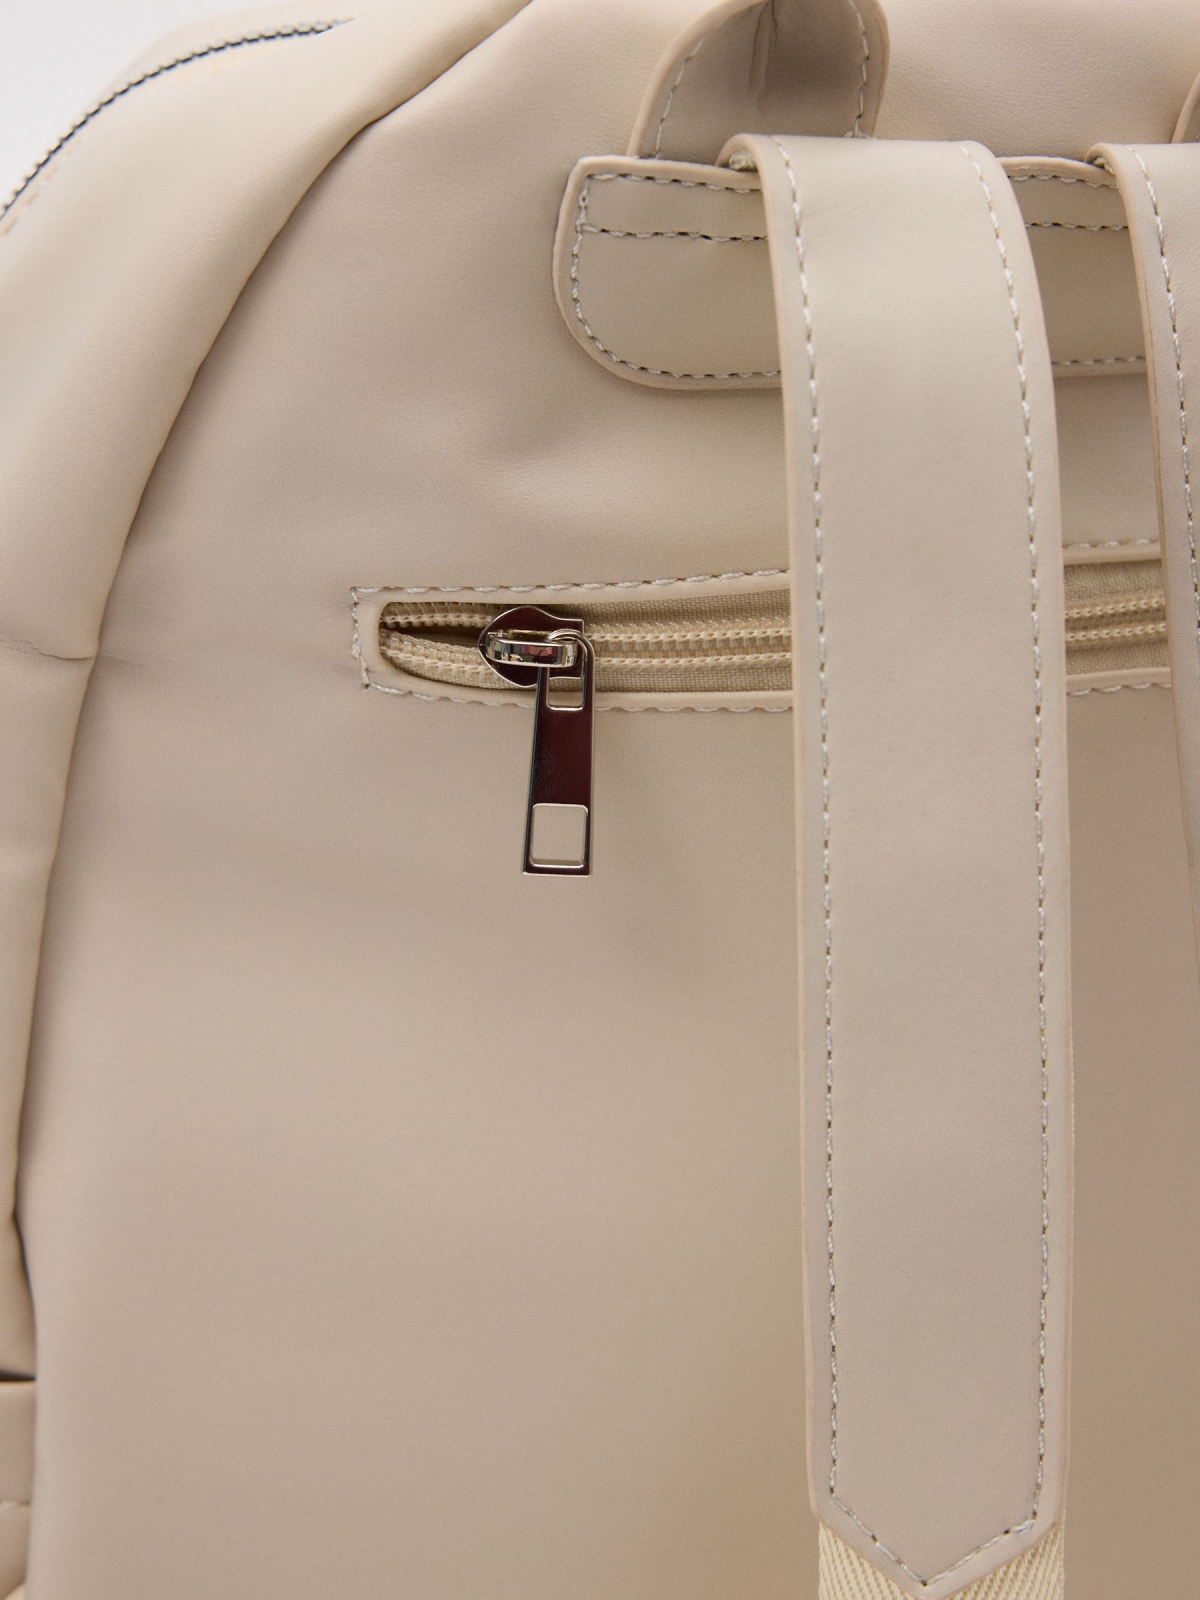 Leatherette backpack detail view